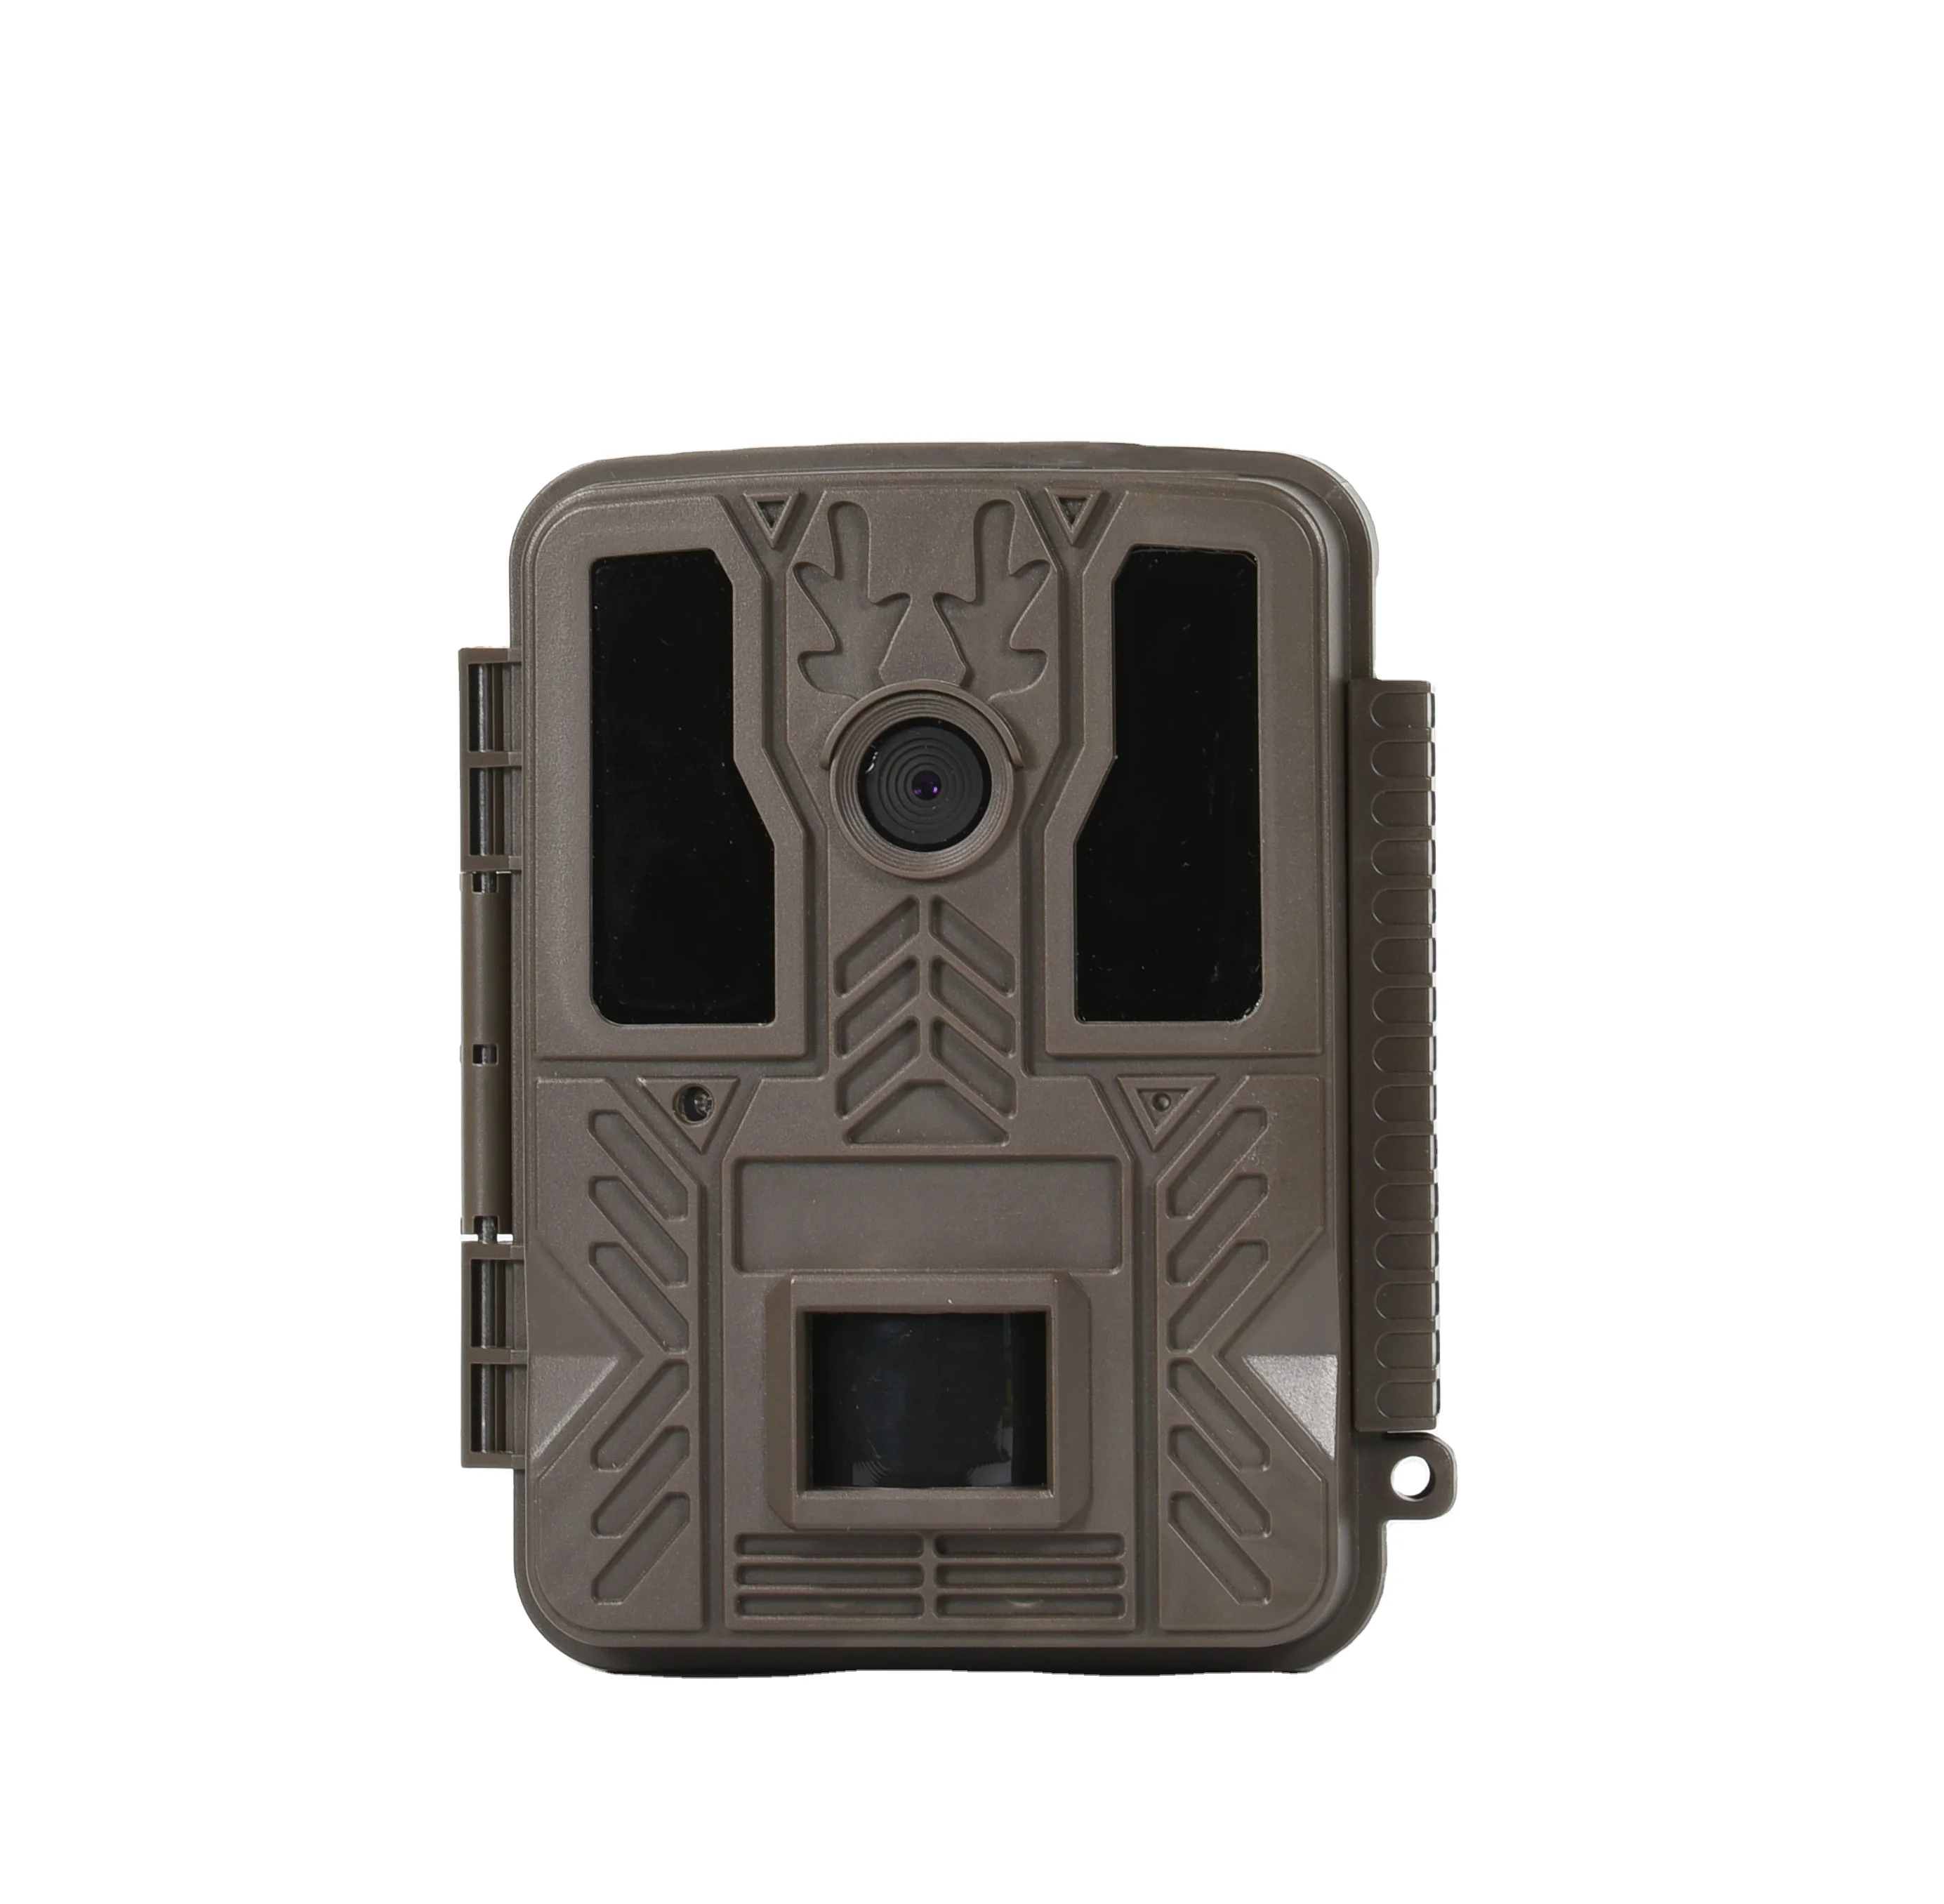 

SunGusOutdoors 24MP Wildlife Hunting Wild Scouting Game Trail Camera Traps with 5MP Color CMOS 940nm No Glow IR LEDs